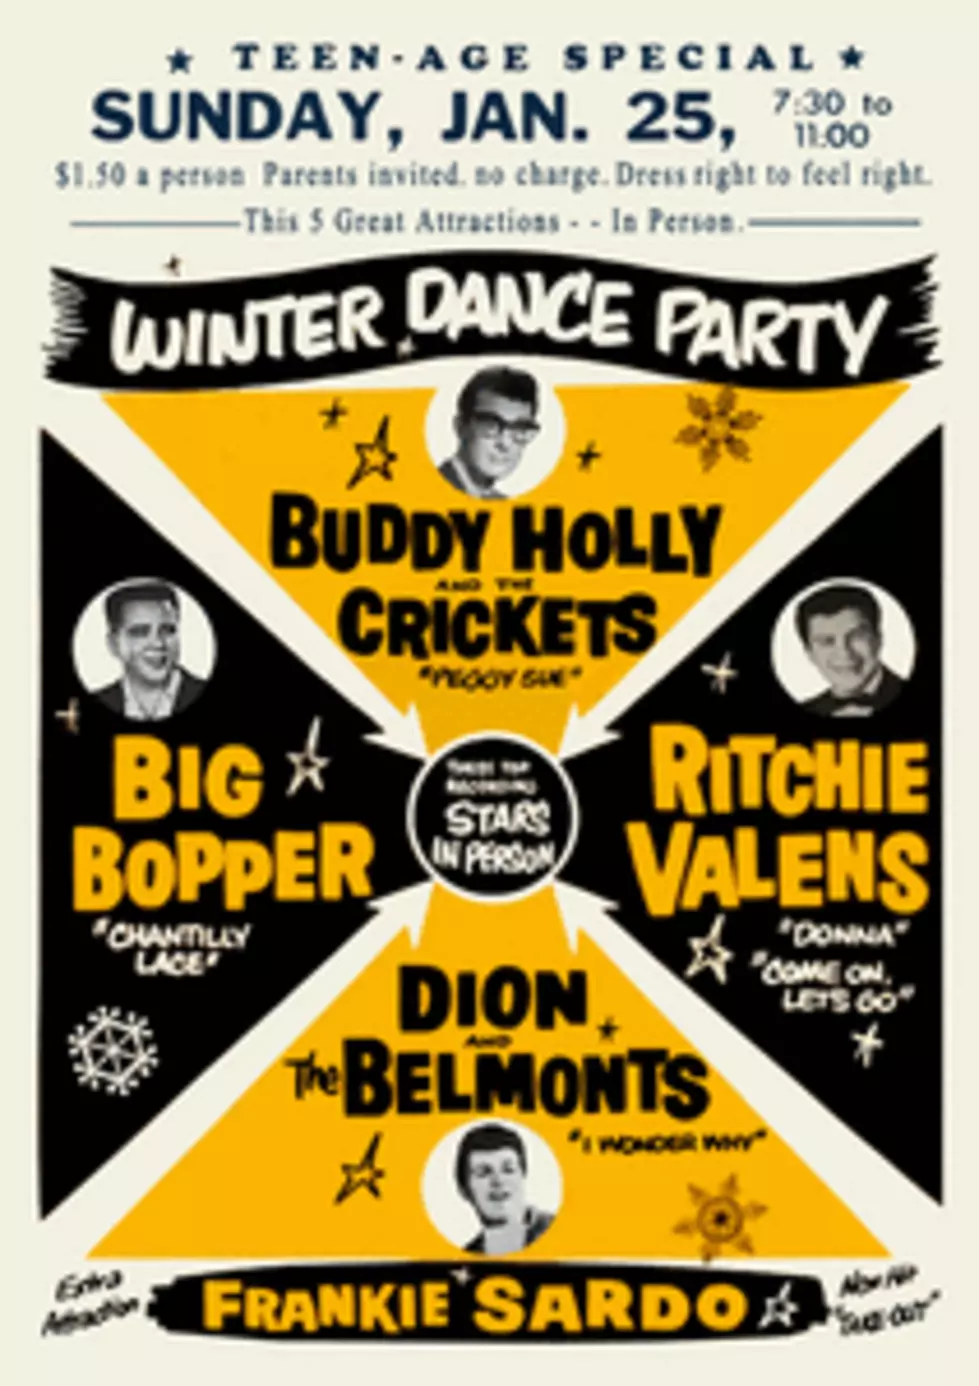 Buddy Holly, The Big Bopper and Richie Valens Remembered This Friday! (VIDEO)